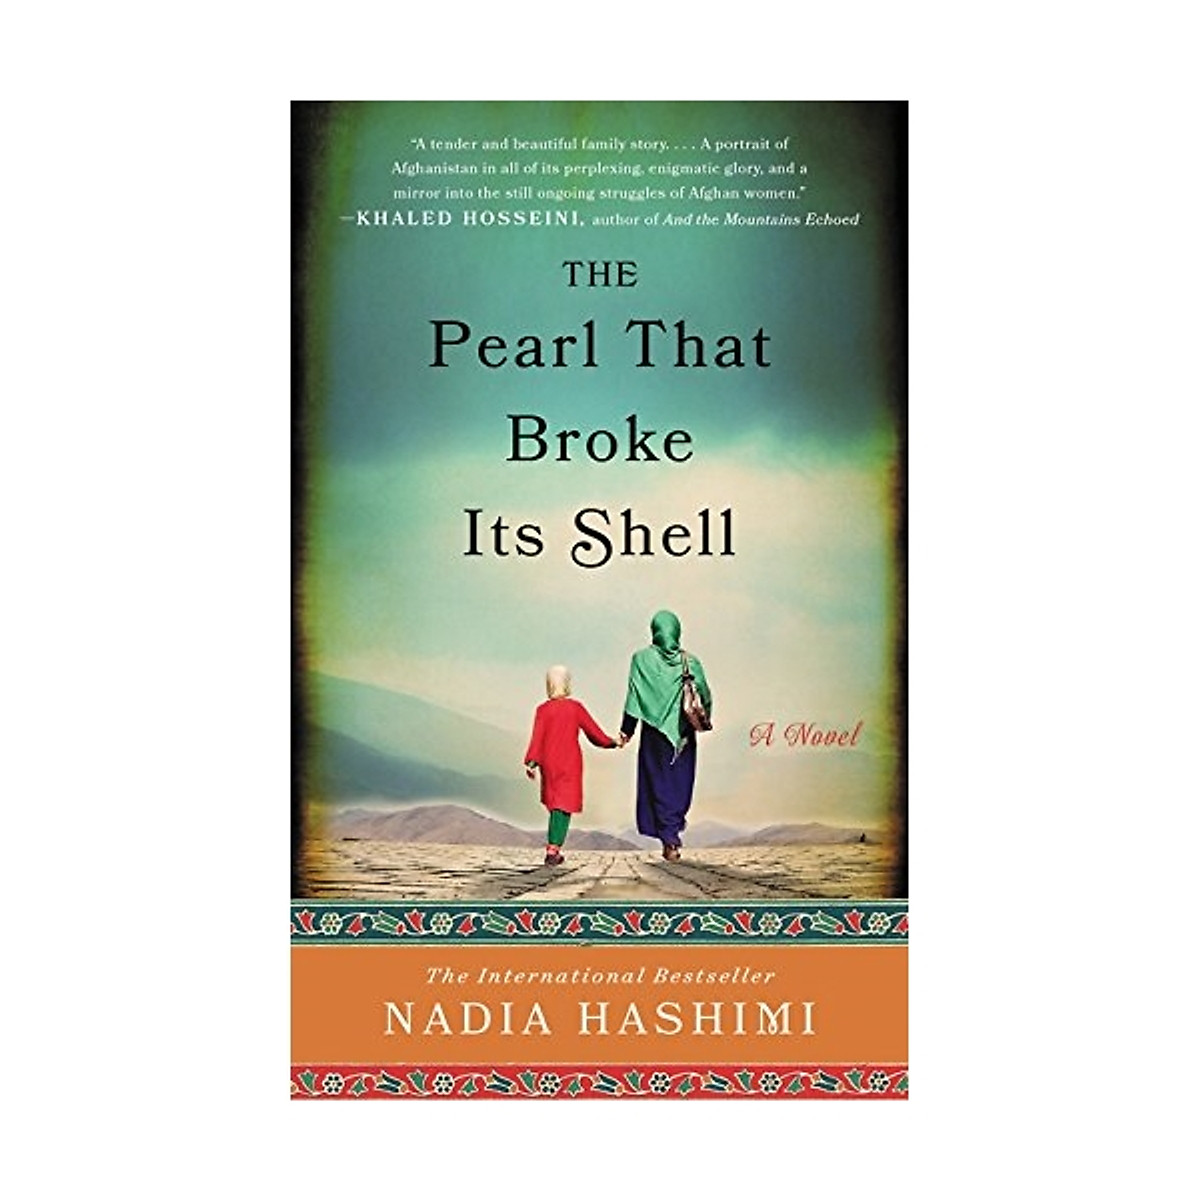 The Pearl That Broke Its Shell - Fiction - Literature